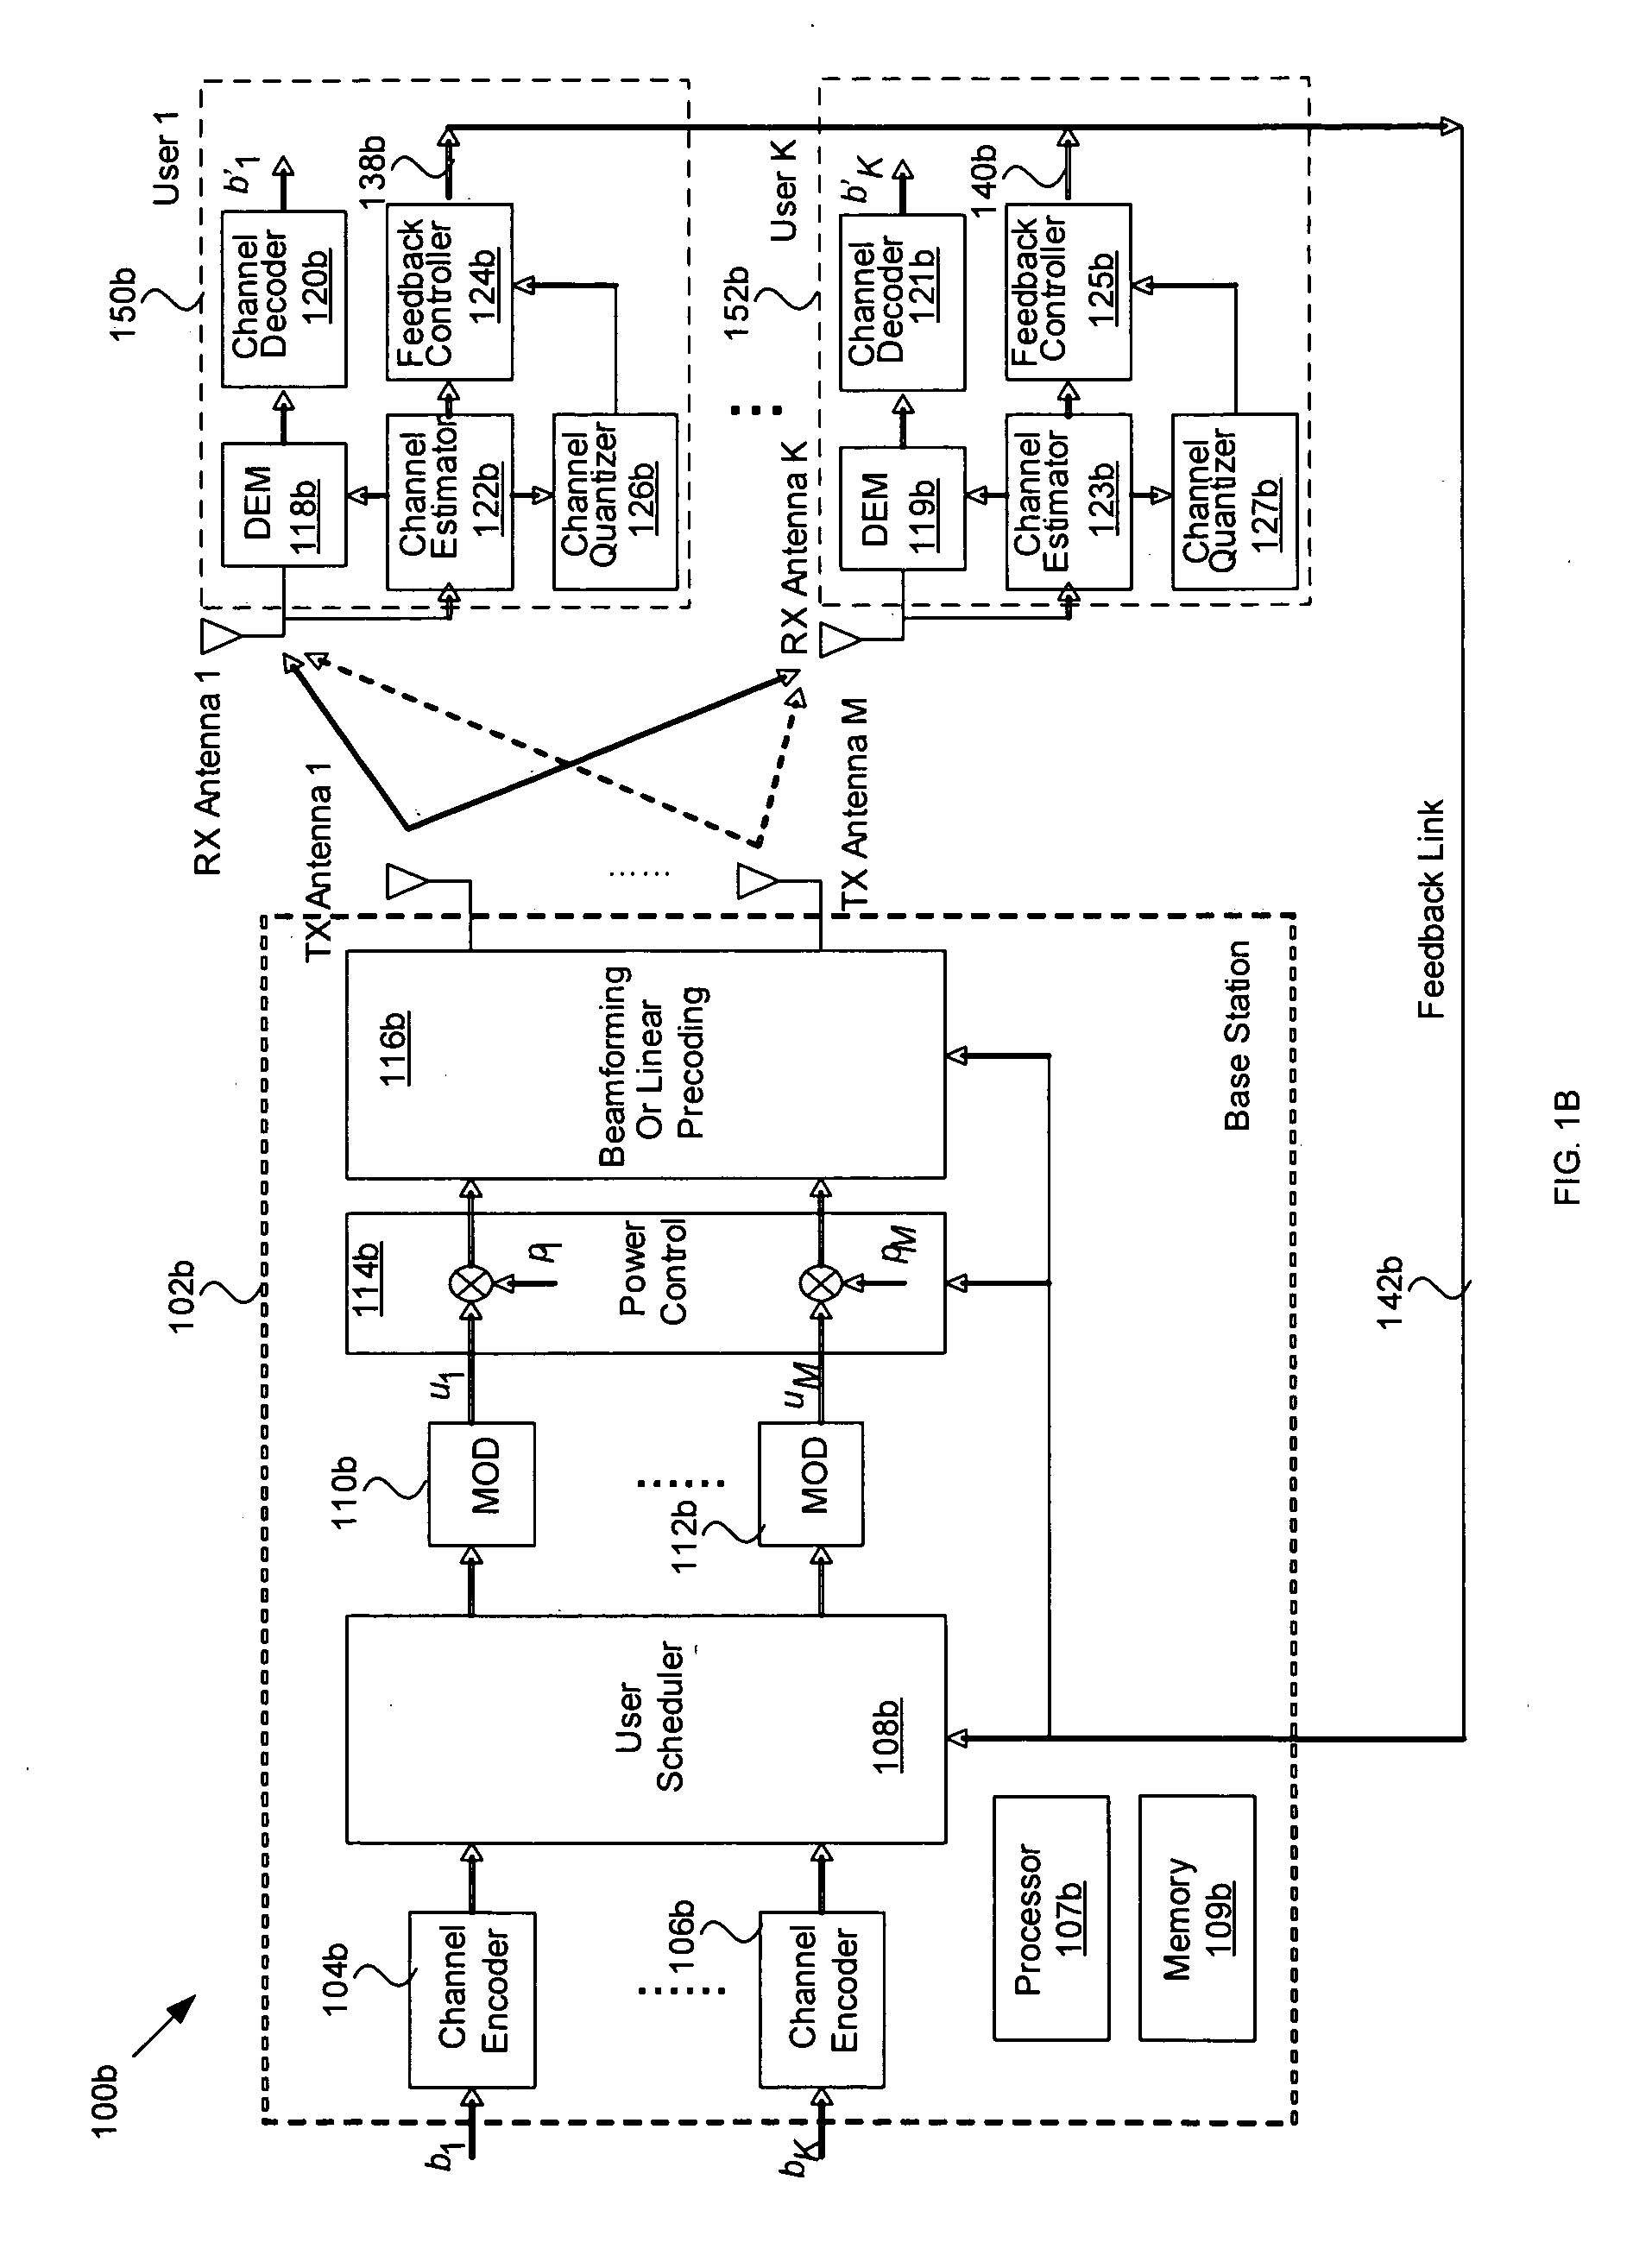 Method and system for an improved user group selection scheme with finite-rate channel state information feedback for FDD multiuser MIMO downlink transmission